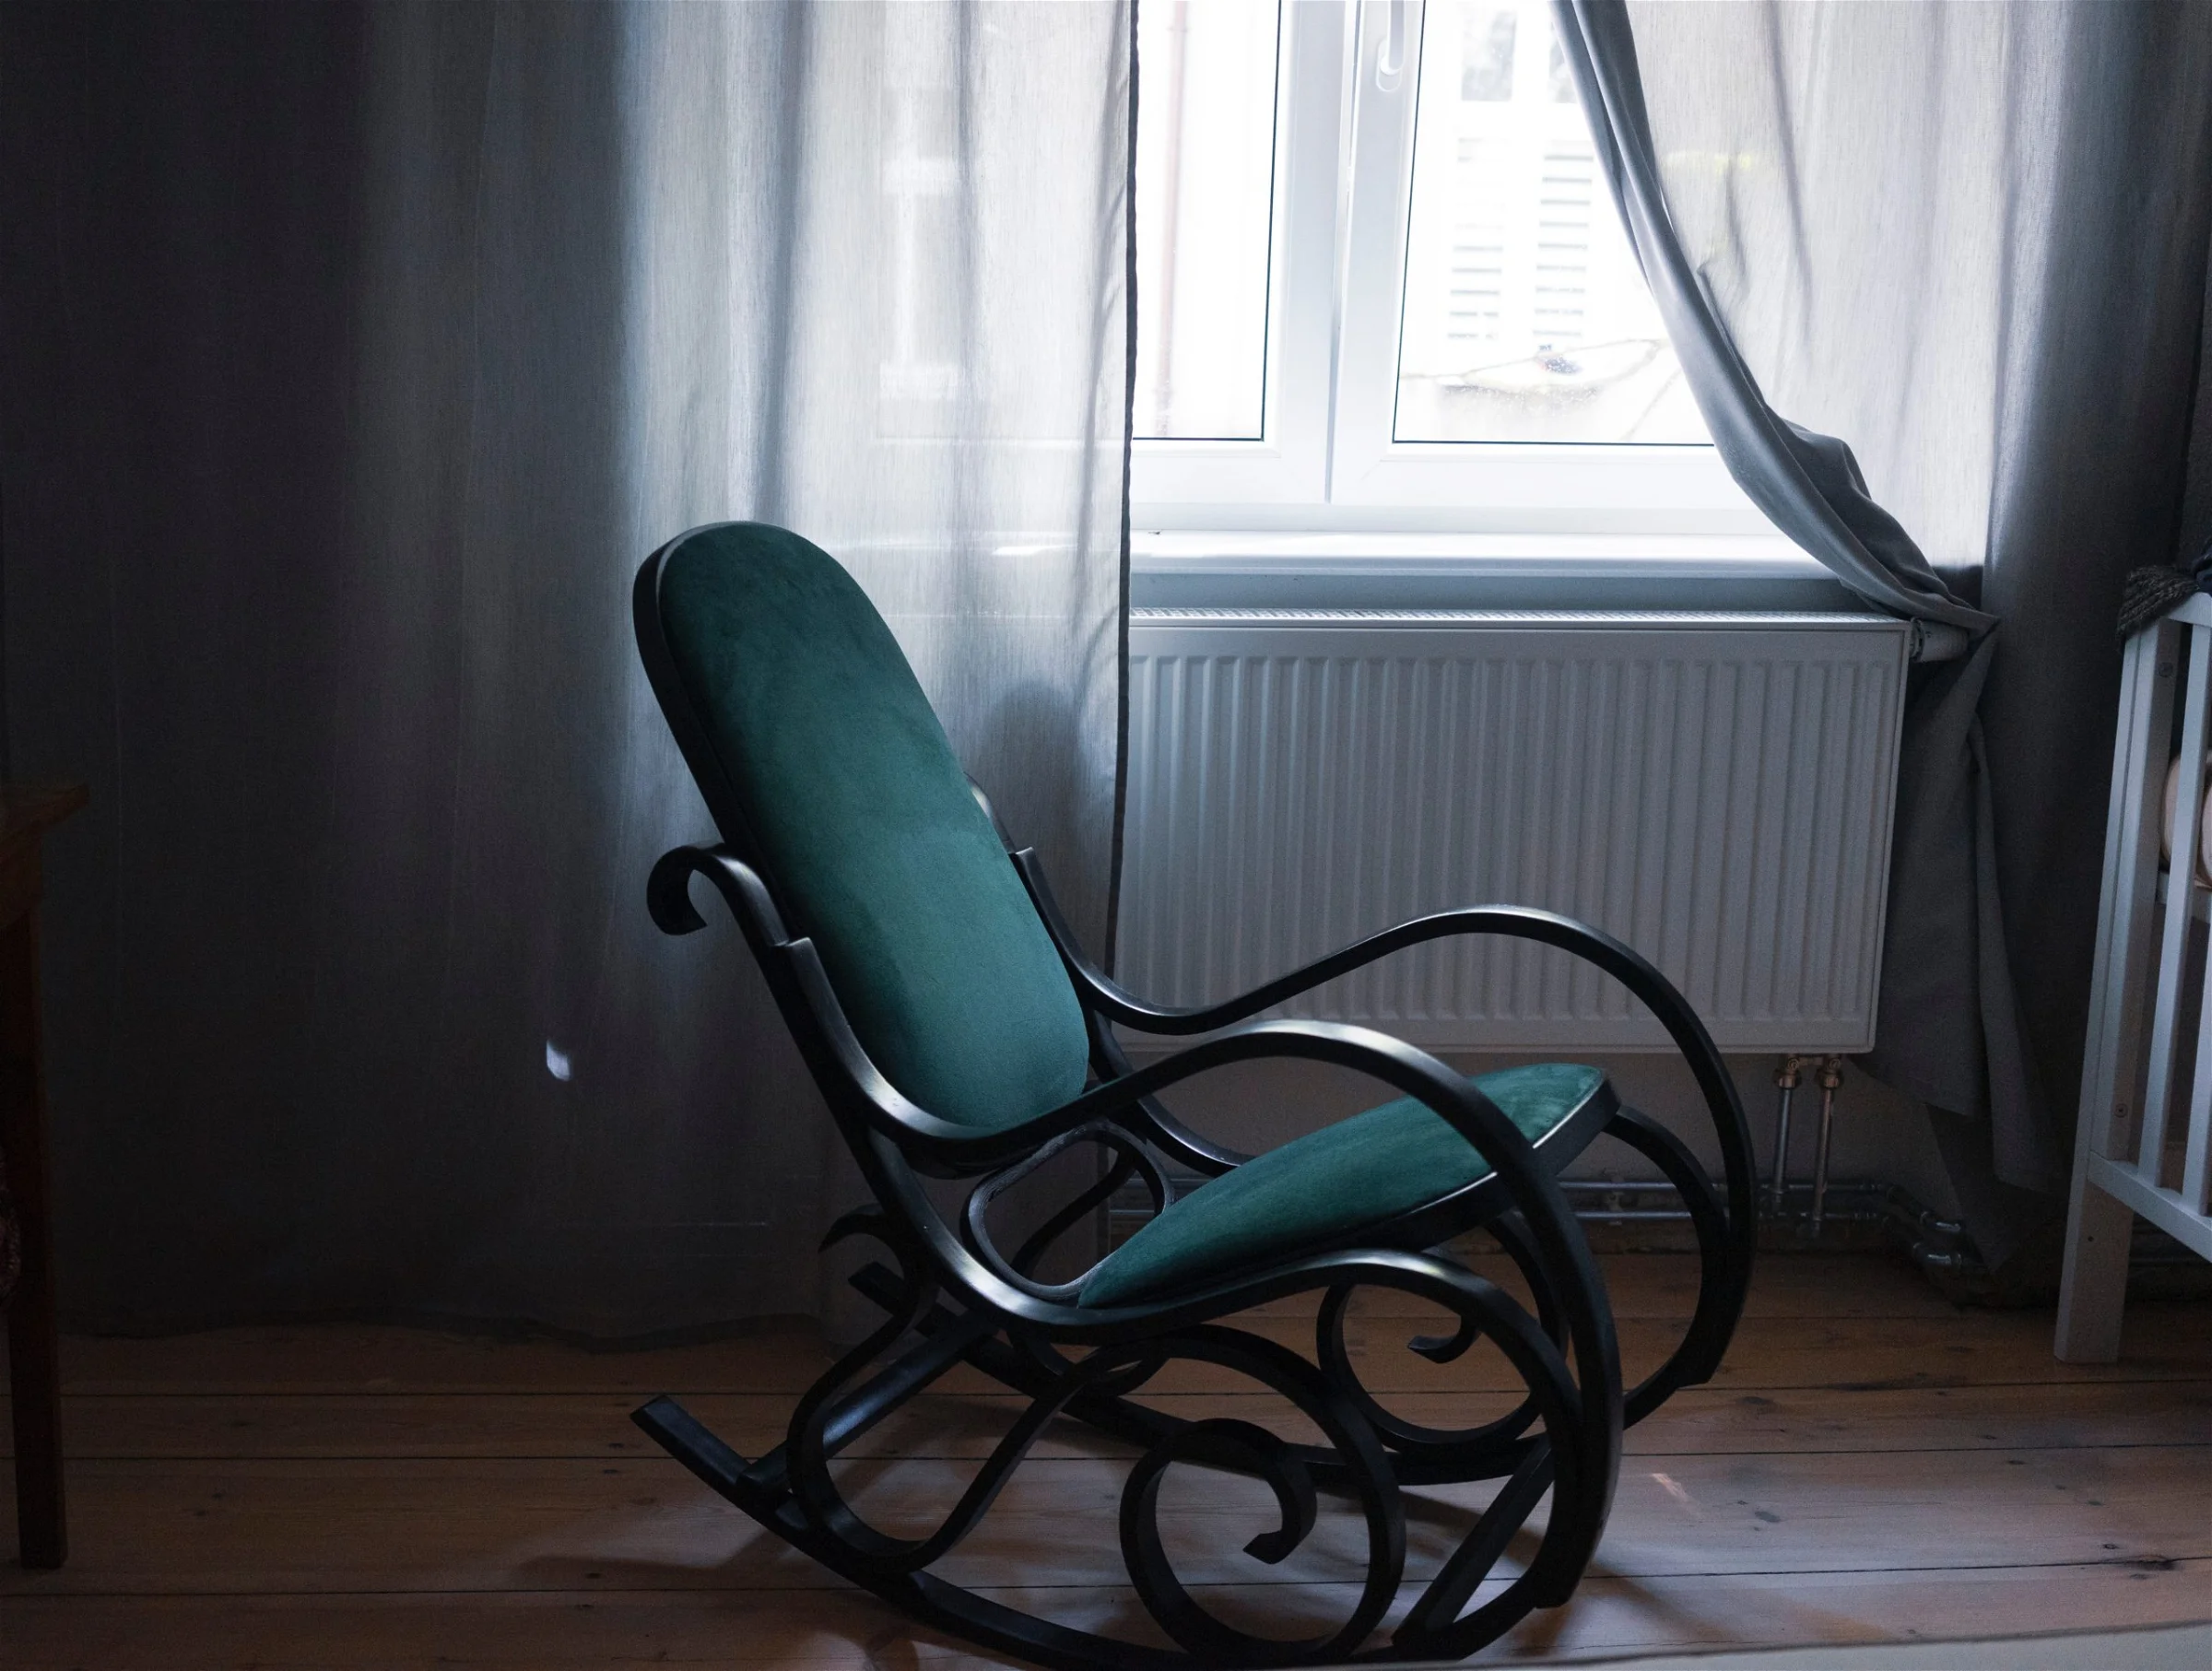 Health Benefits of a Rocking Chair